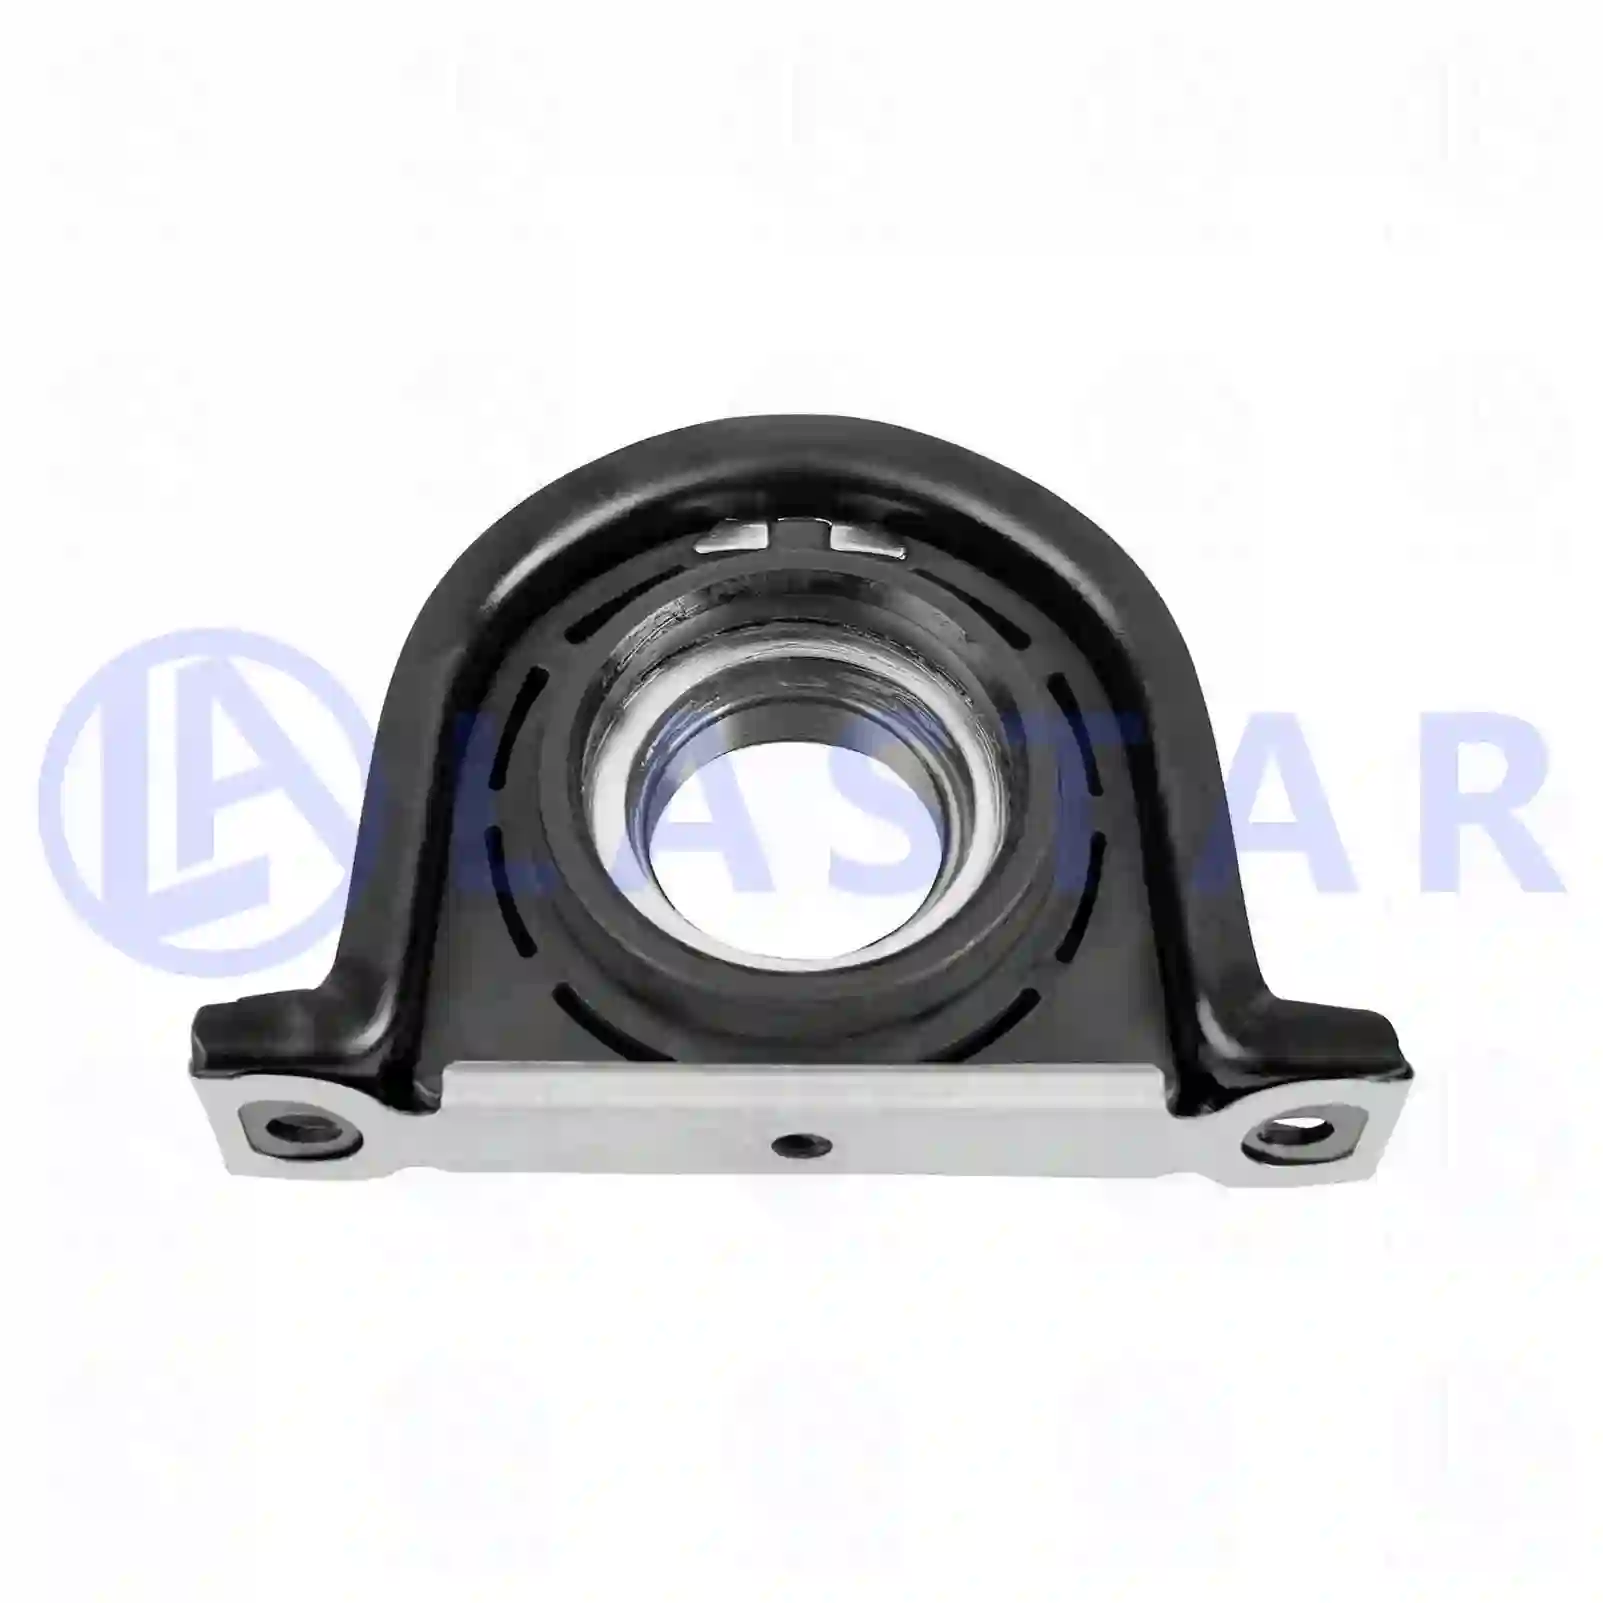 Support Bearing Center bearing, la no: 77734288 ,  oem no:1408367, 1409056, 1782199, ZG02495-0008 Lastar Spare Part | Truck Spare Parts, Auotomotive Spare Parts